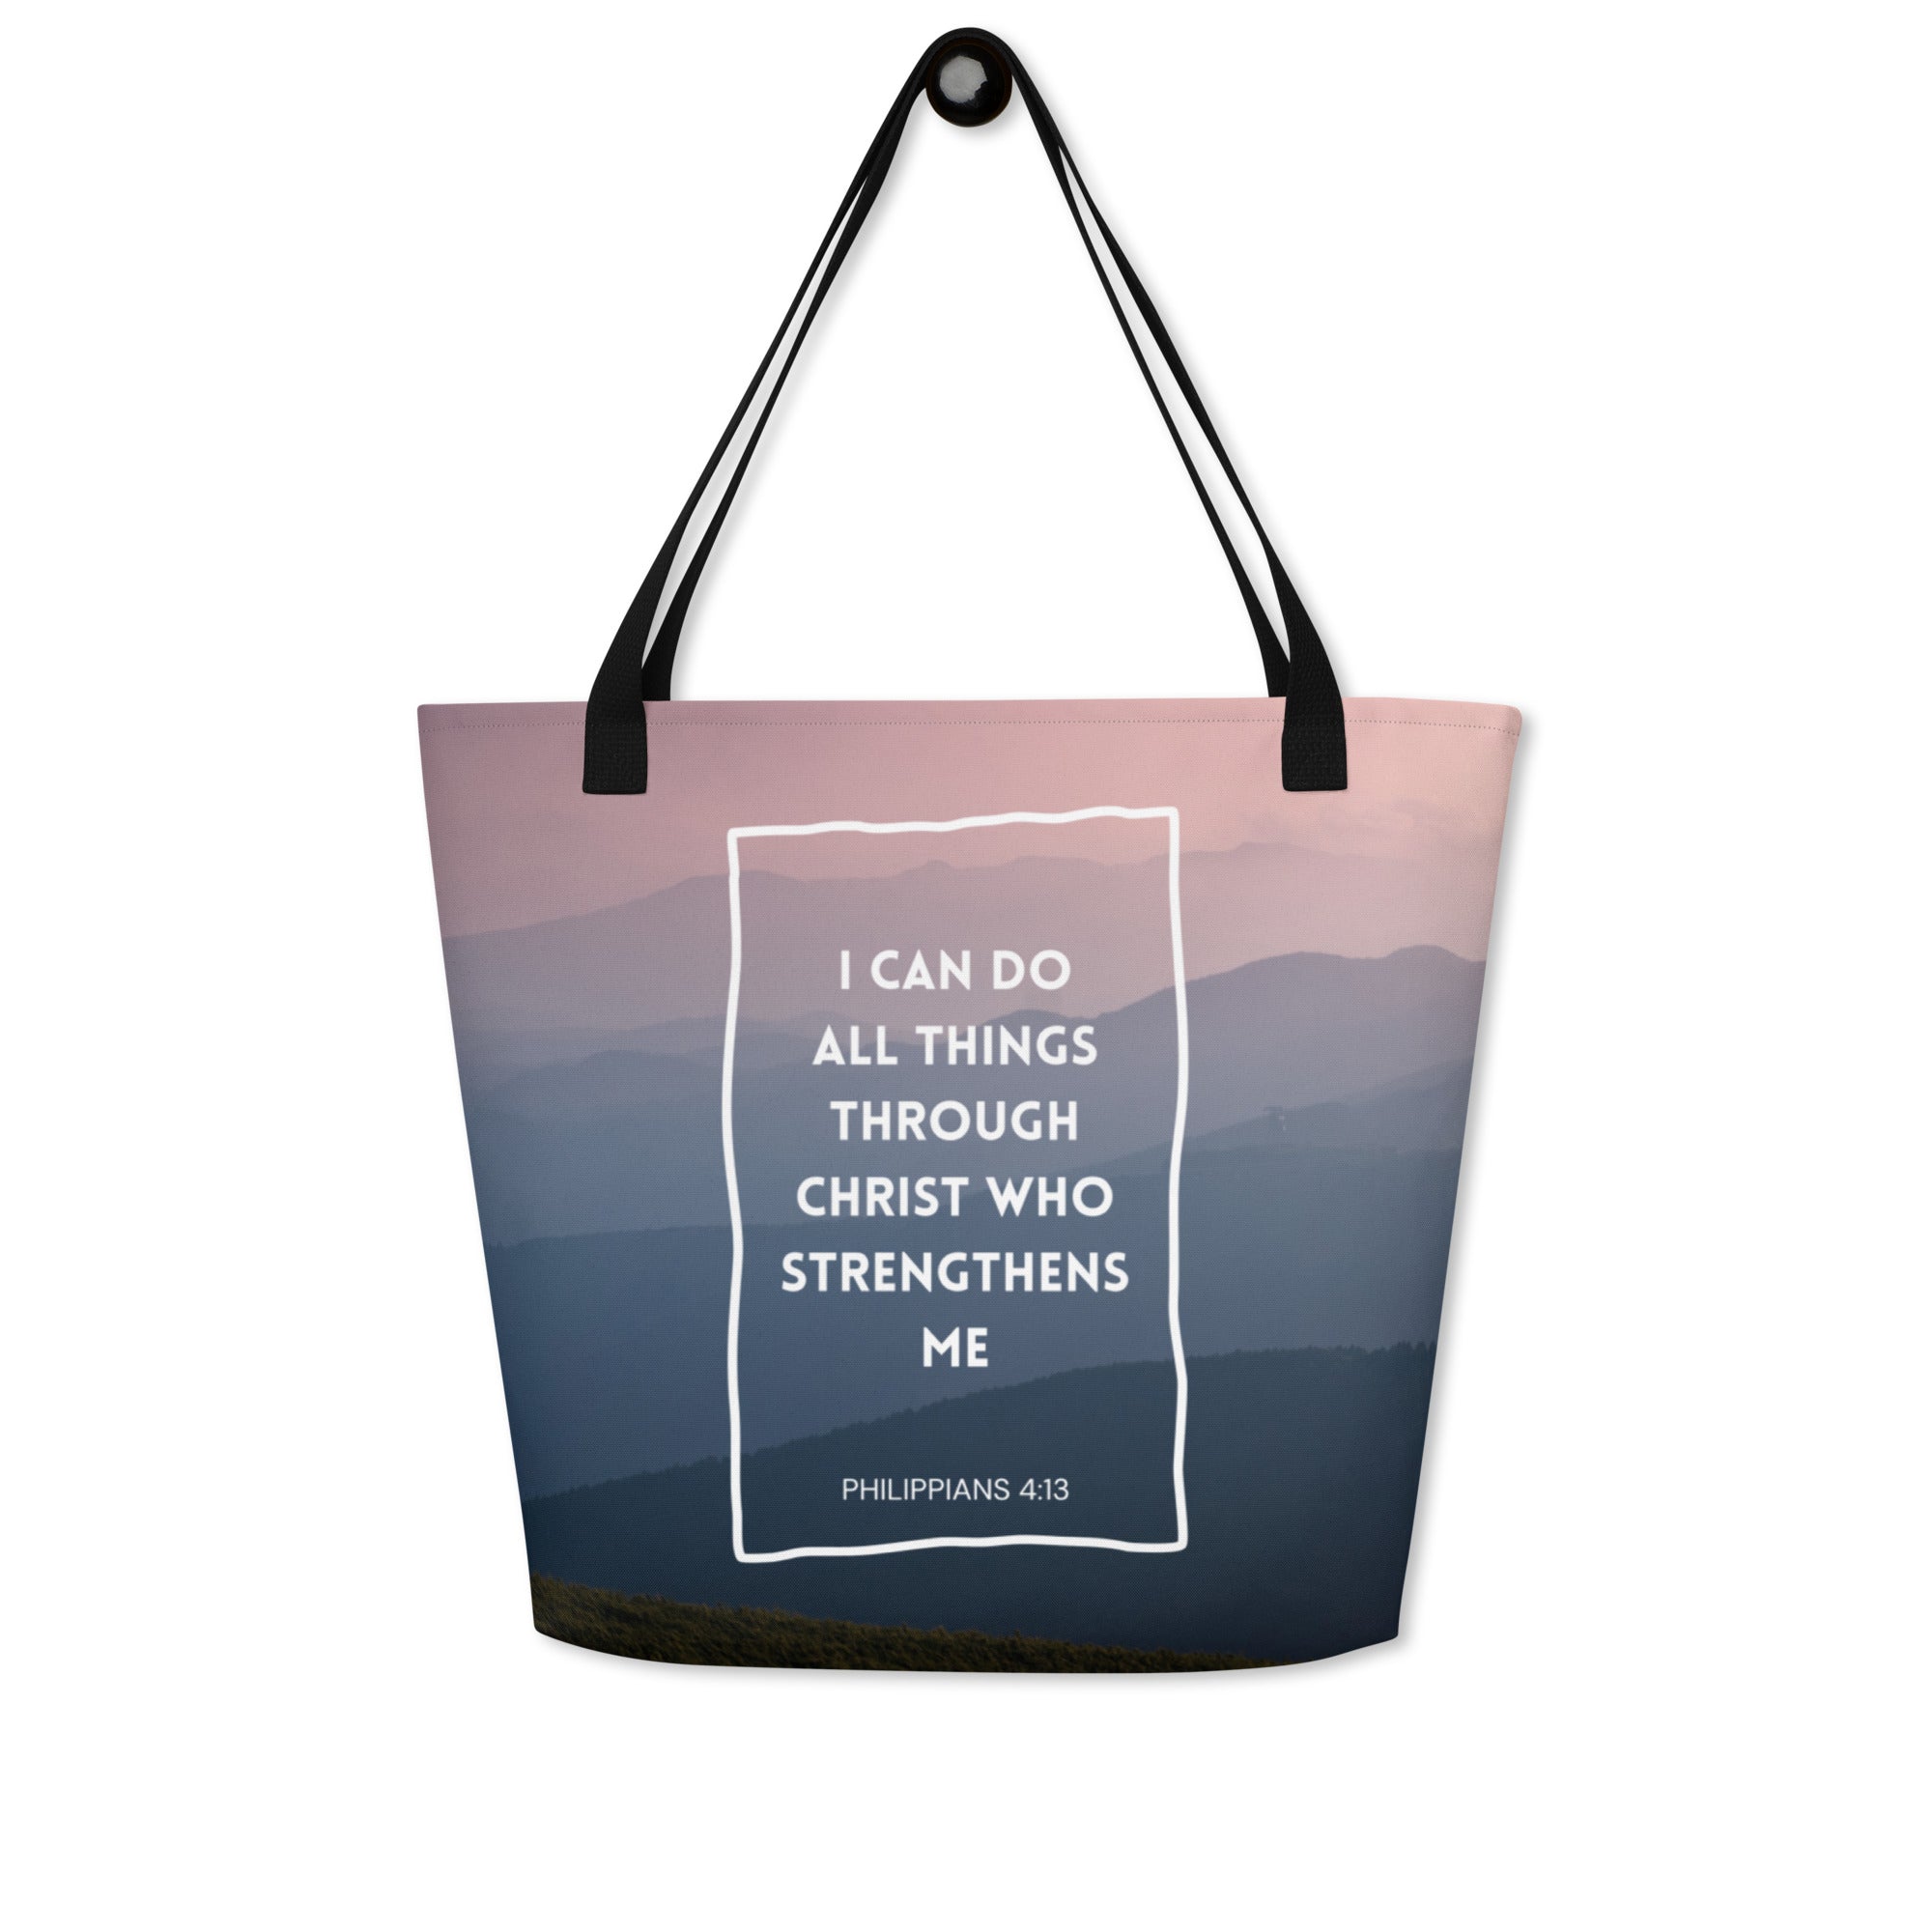 I can do all things - Large Tote Bag